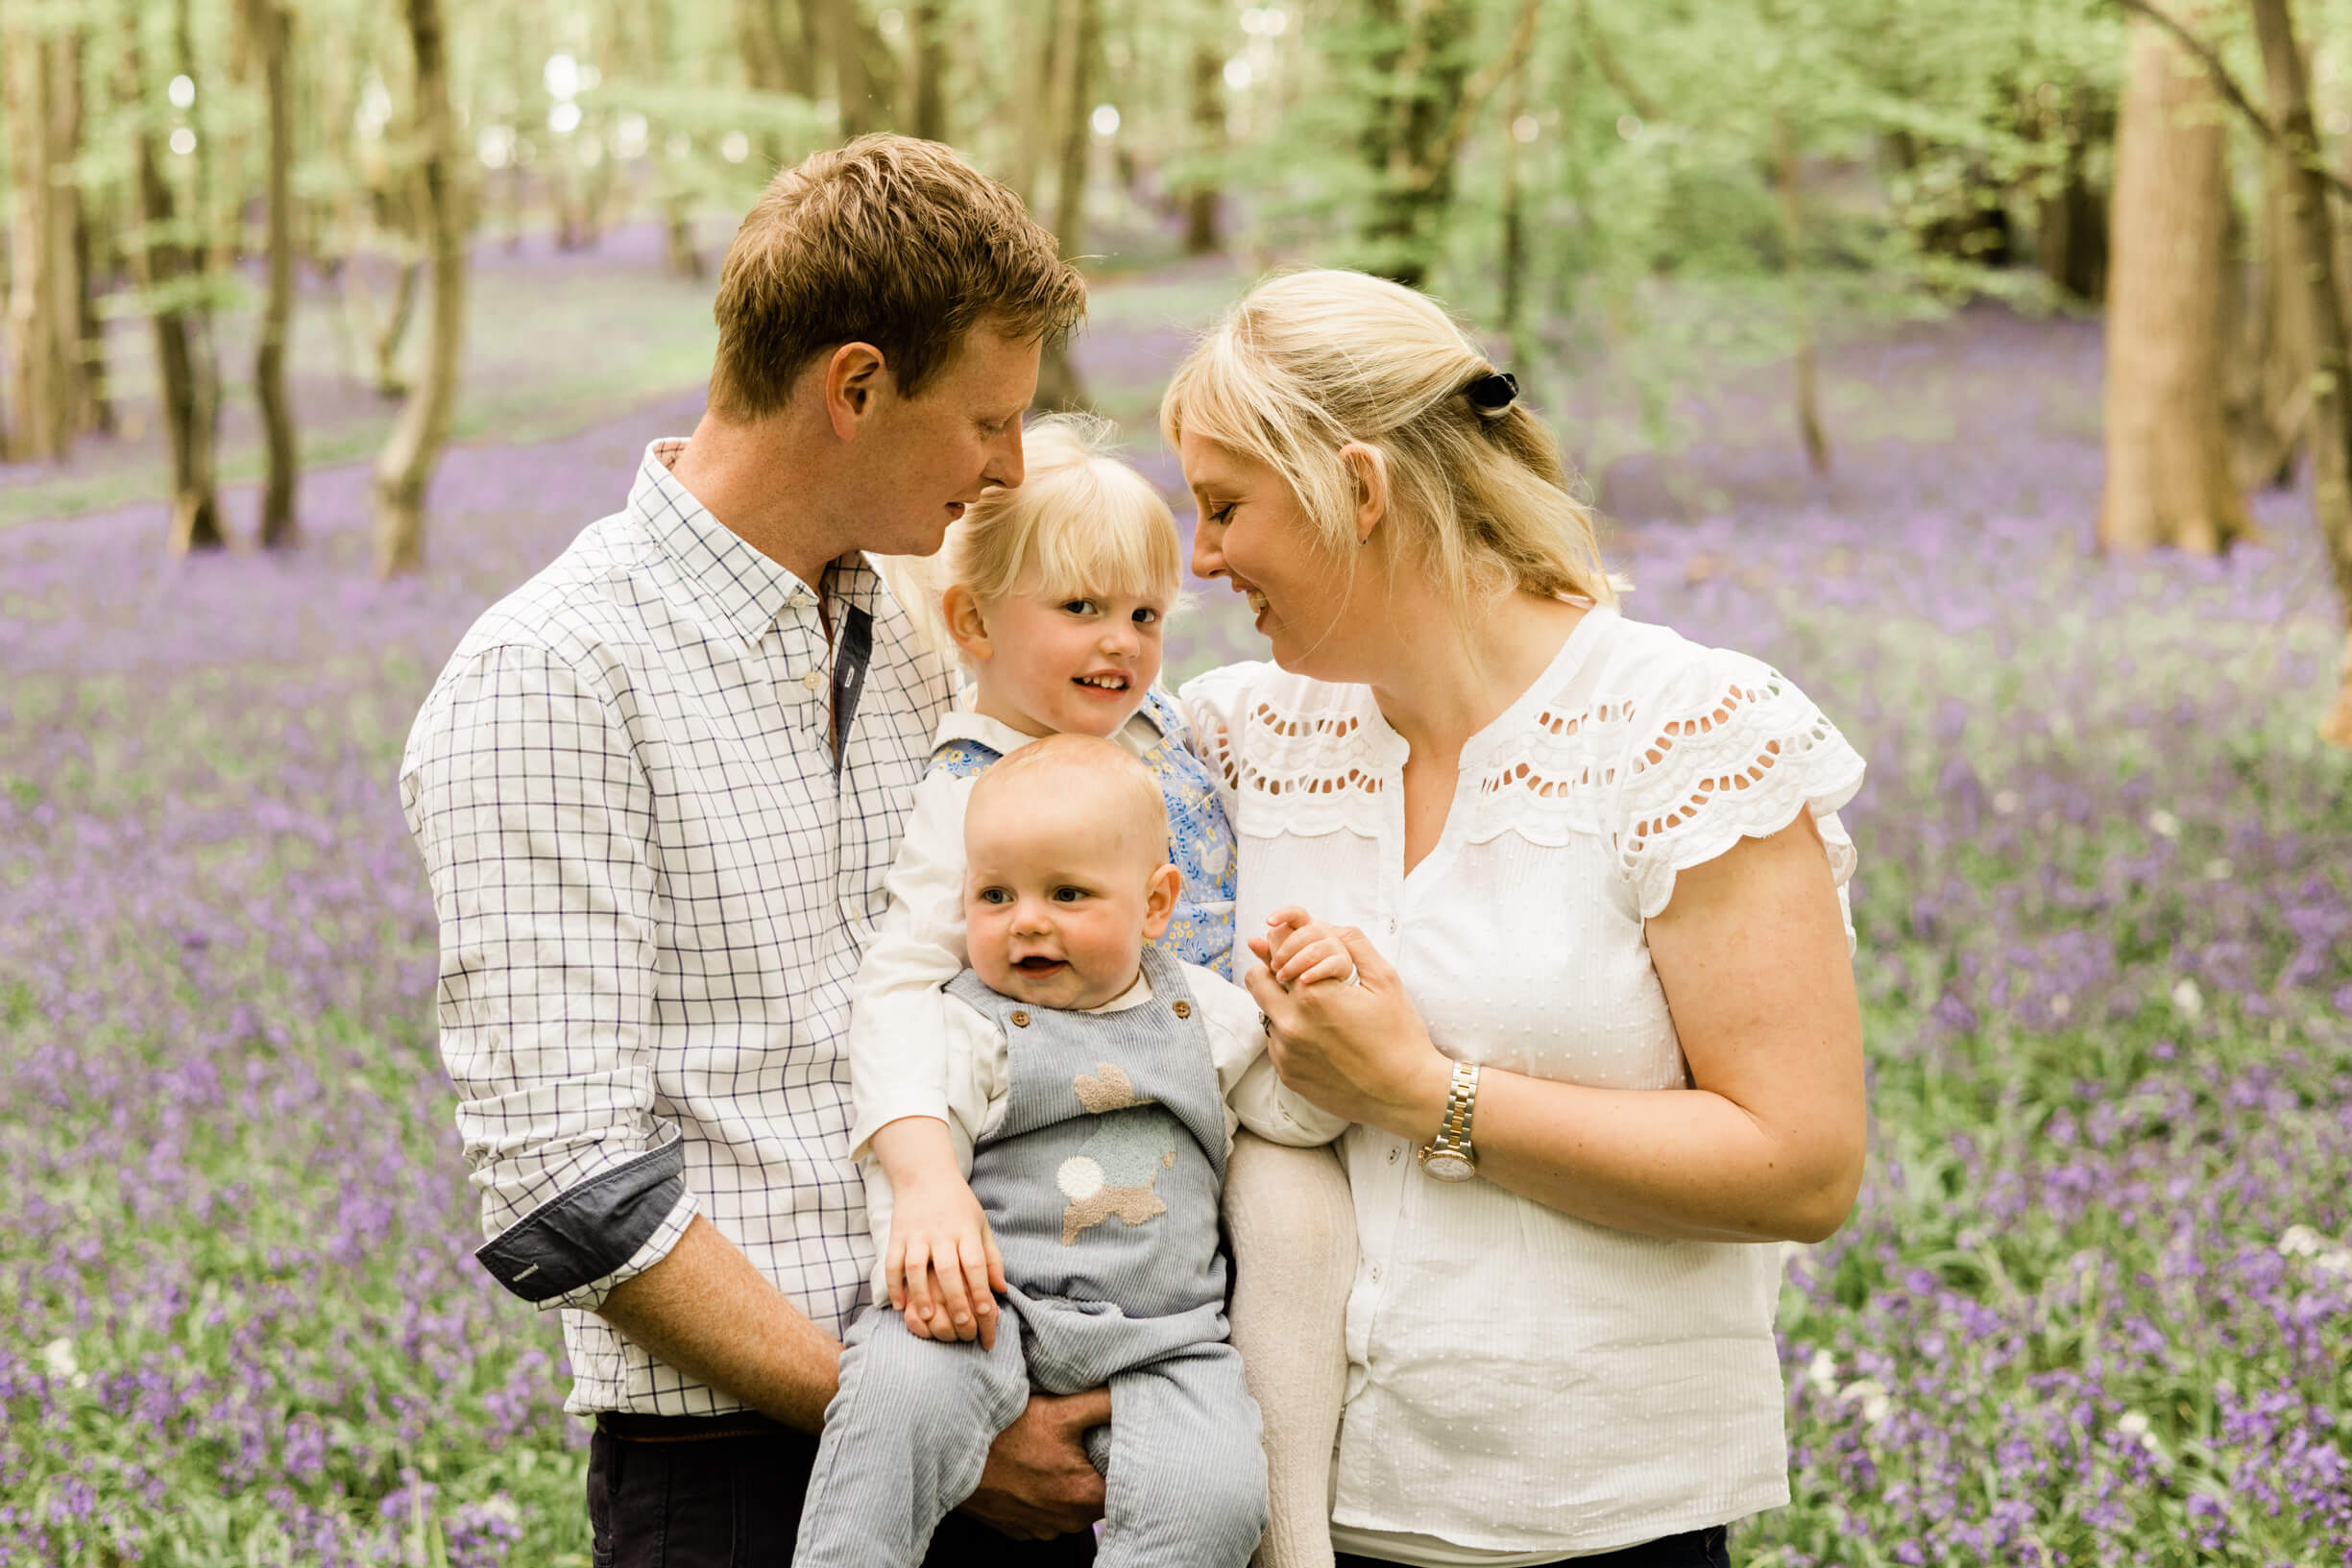 Happy family photography shoot in Essex. Relaxed, natural in the bluebell wood by Kika Mitchell Photography